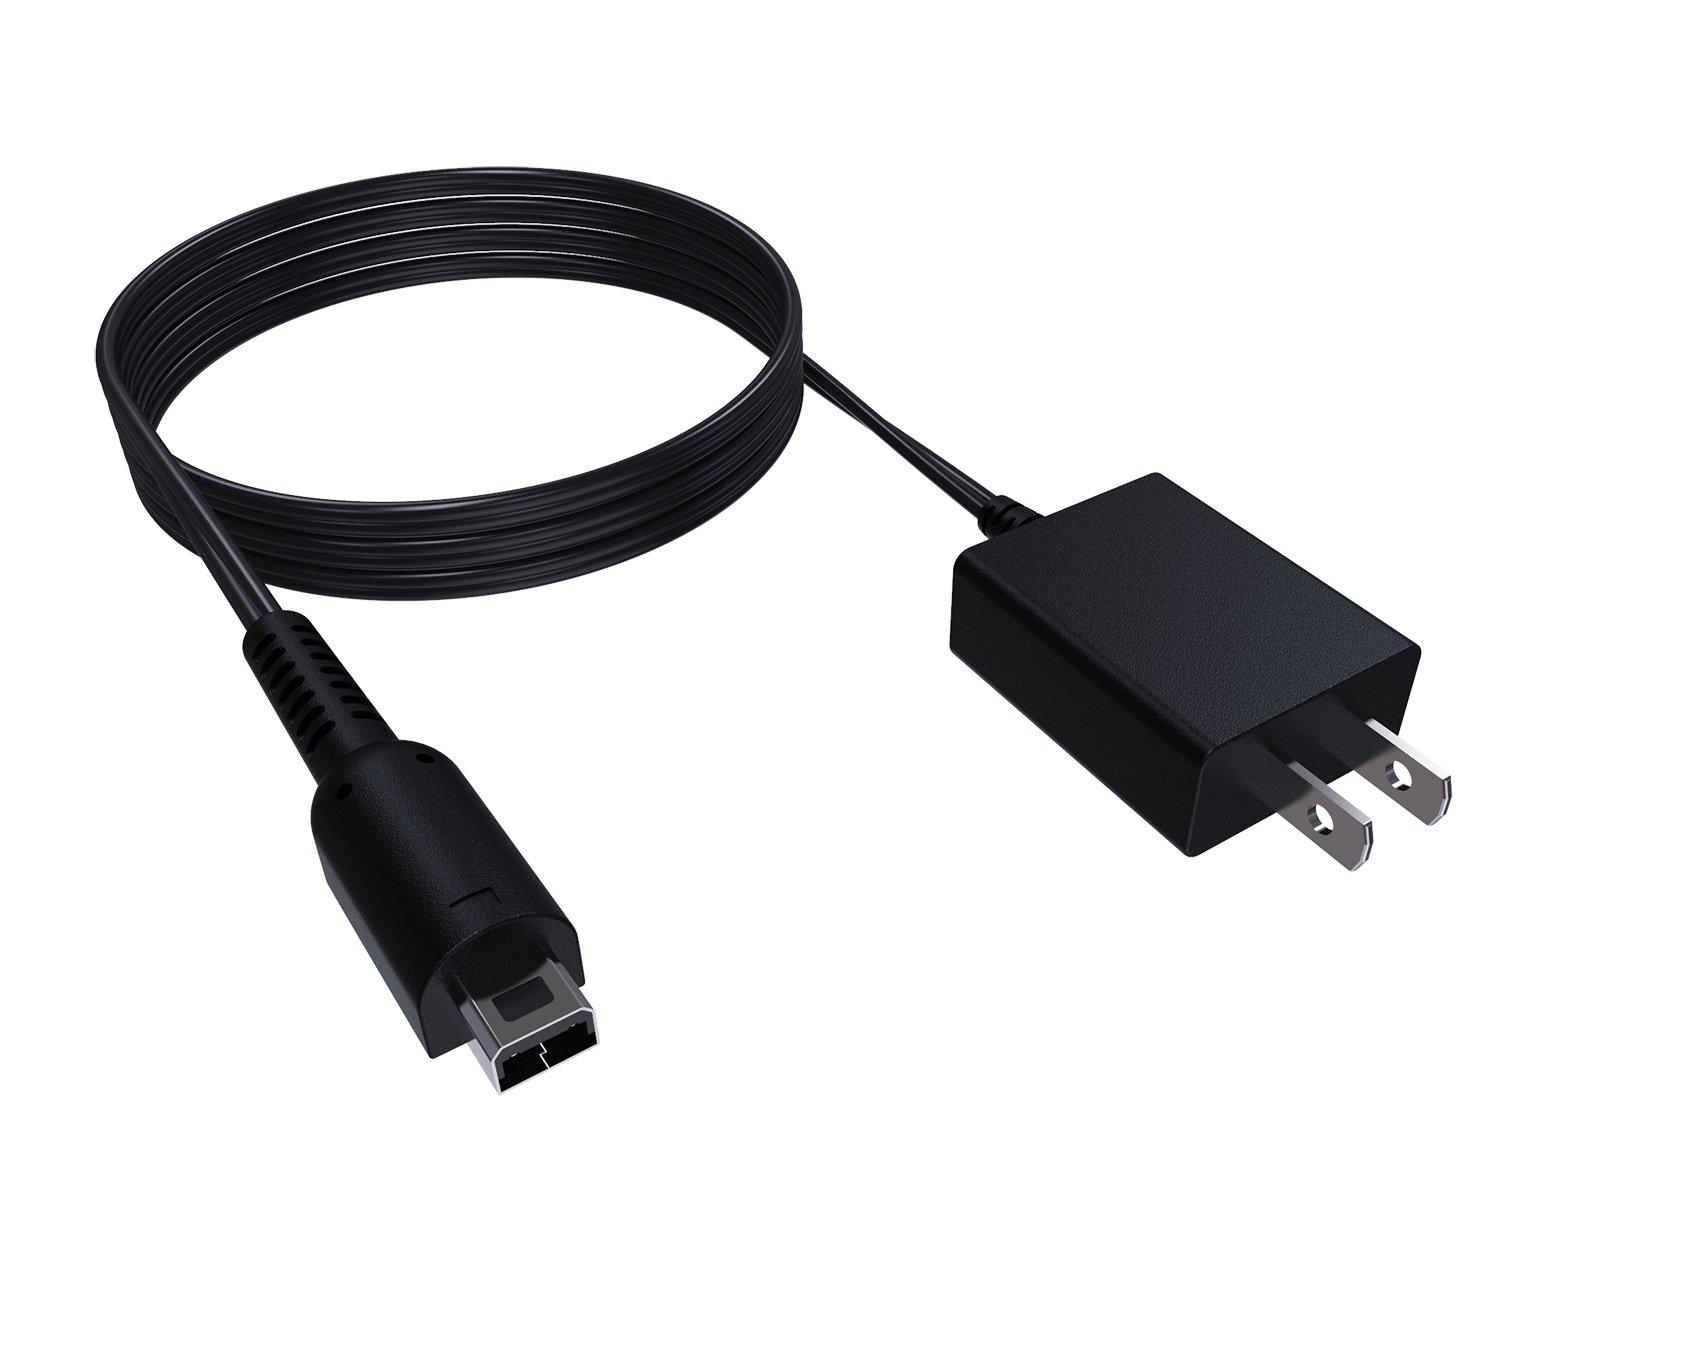 YoK AC Adapter for Nintendo 3DS, 2DS, and DSi